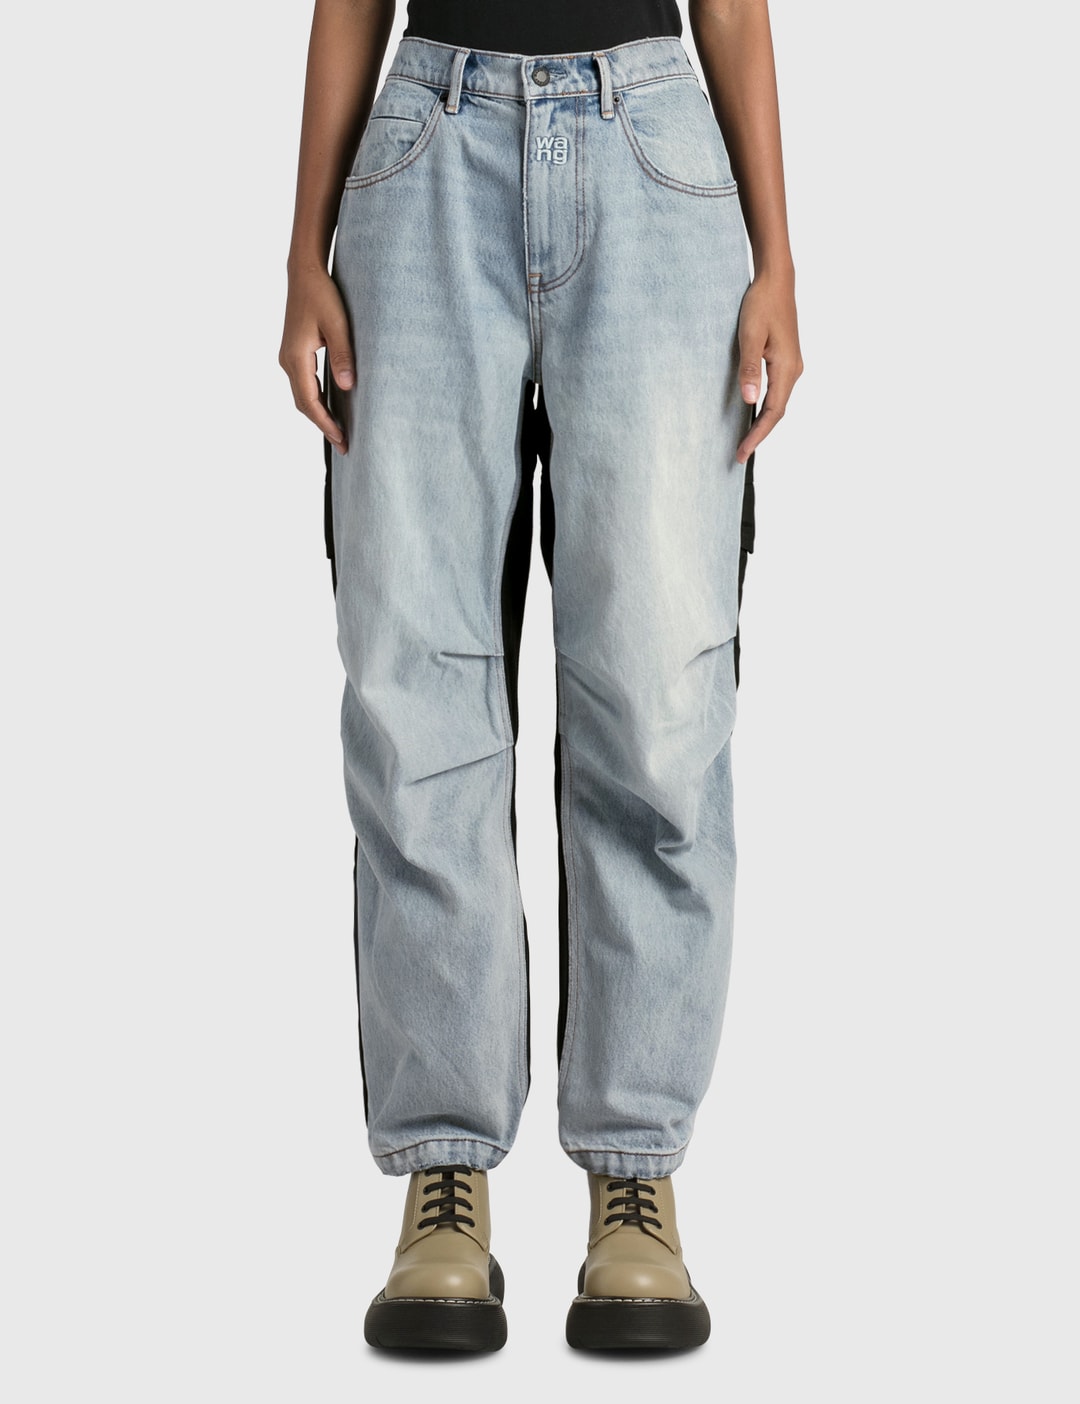 T By Alexander Wang - Hybrid Cargo Jeans | HBX - Globally Curated Fashion  and Lifestyle by Hypebeast